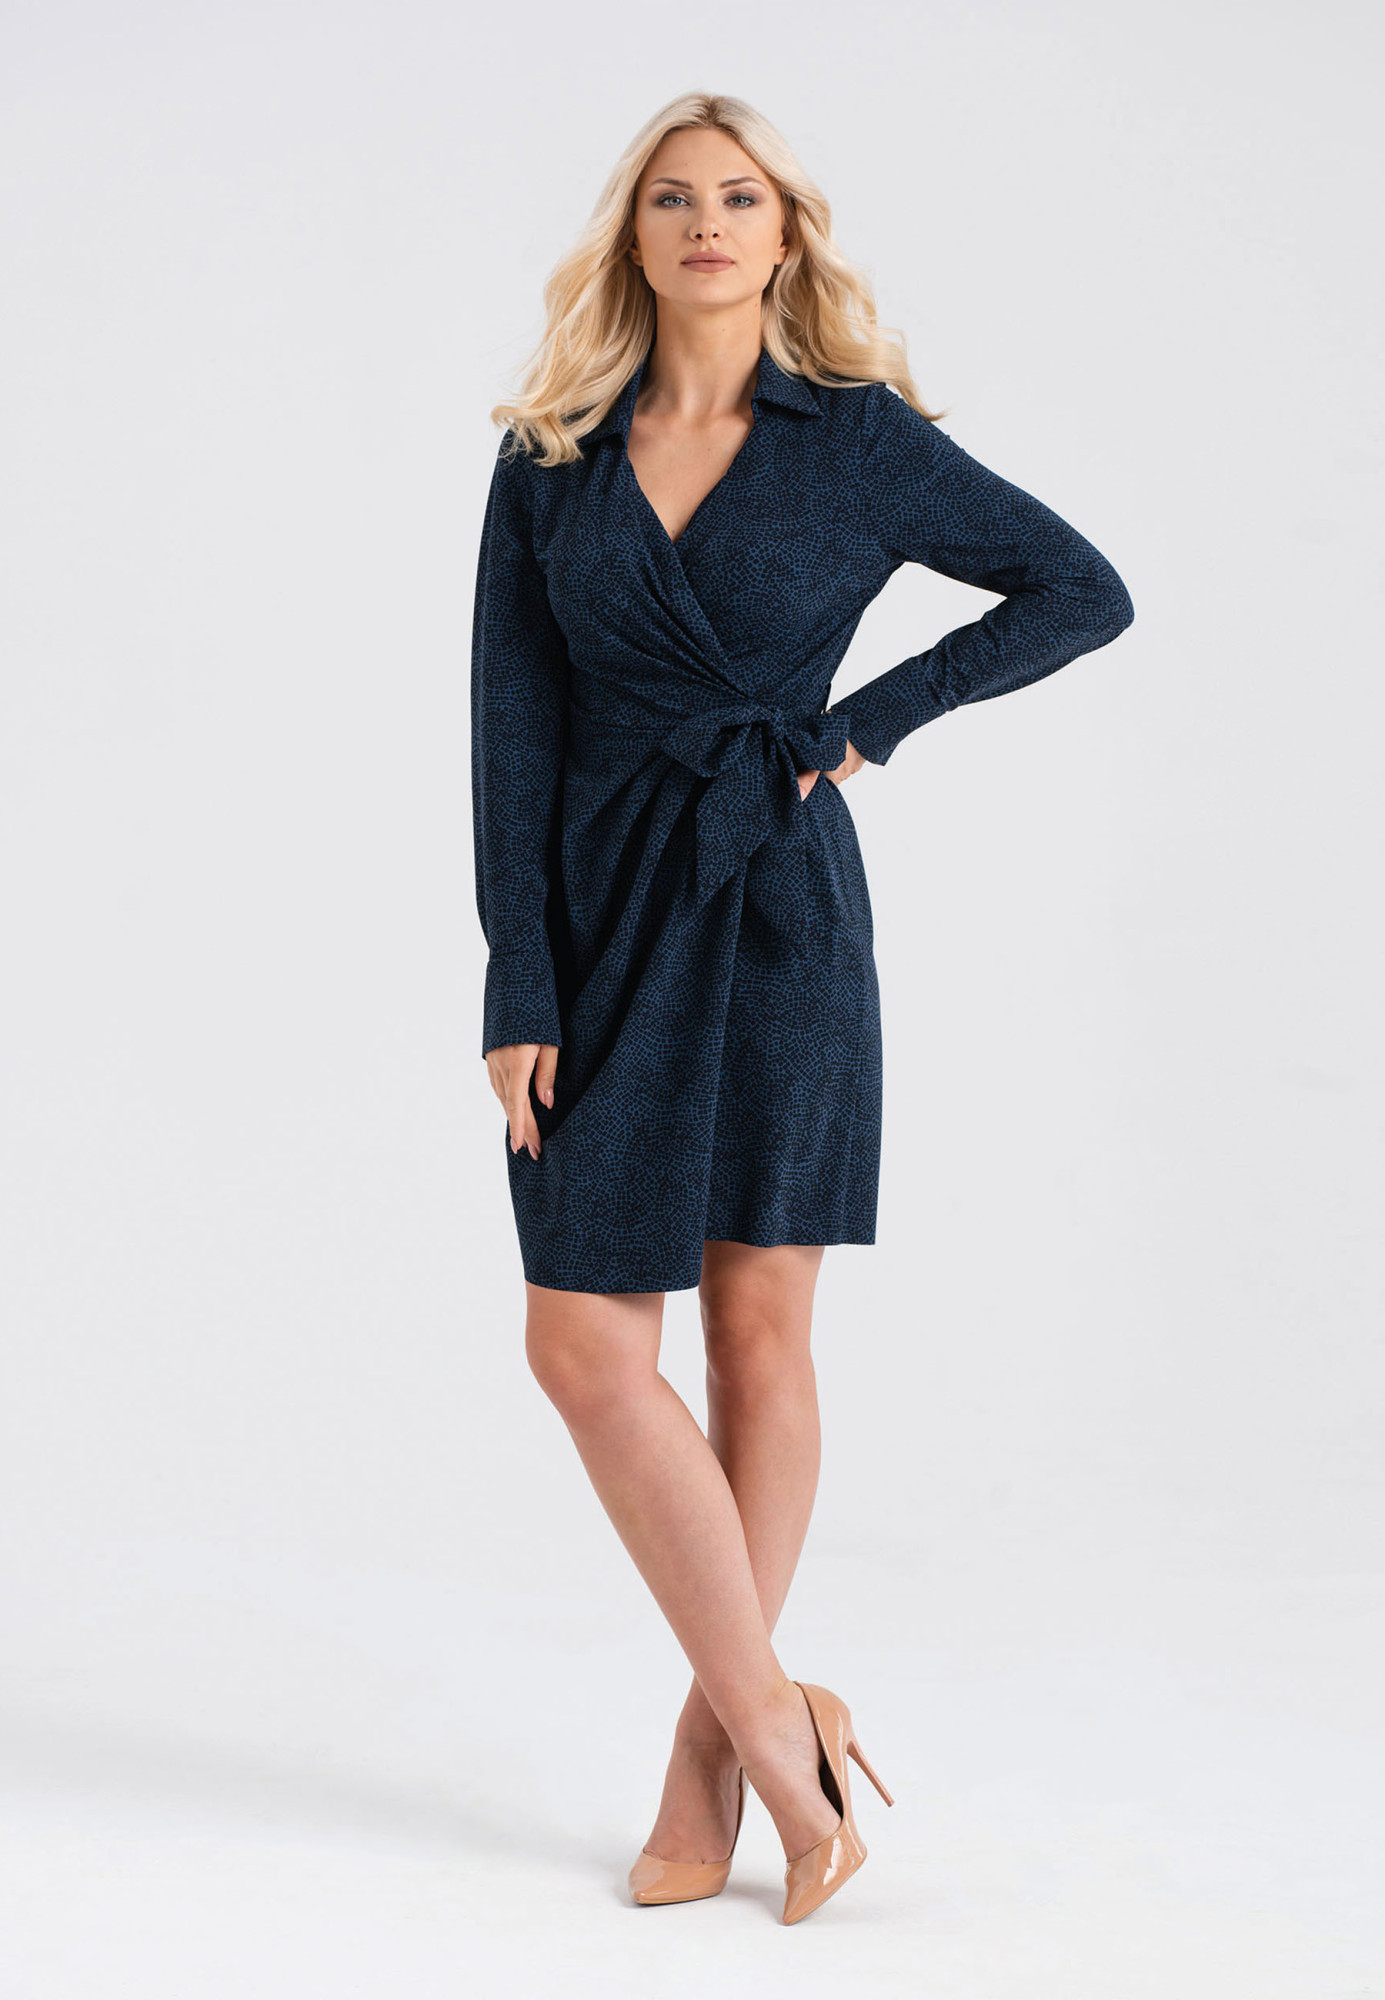 Look Made With Love Šaty 743 Beatrice Navy Blue M